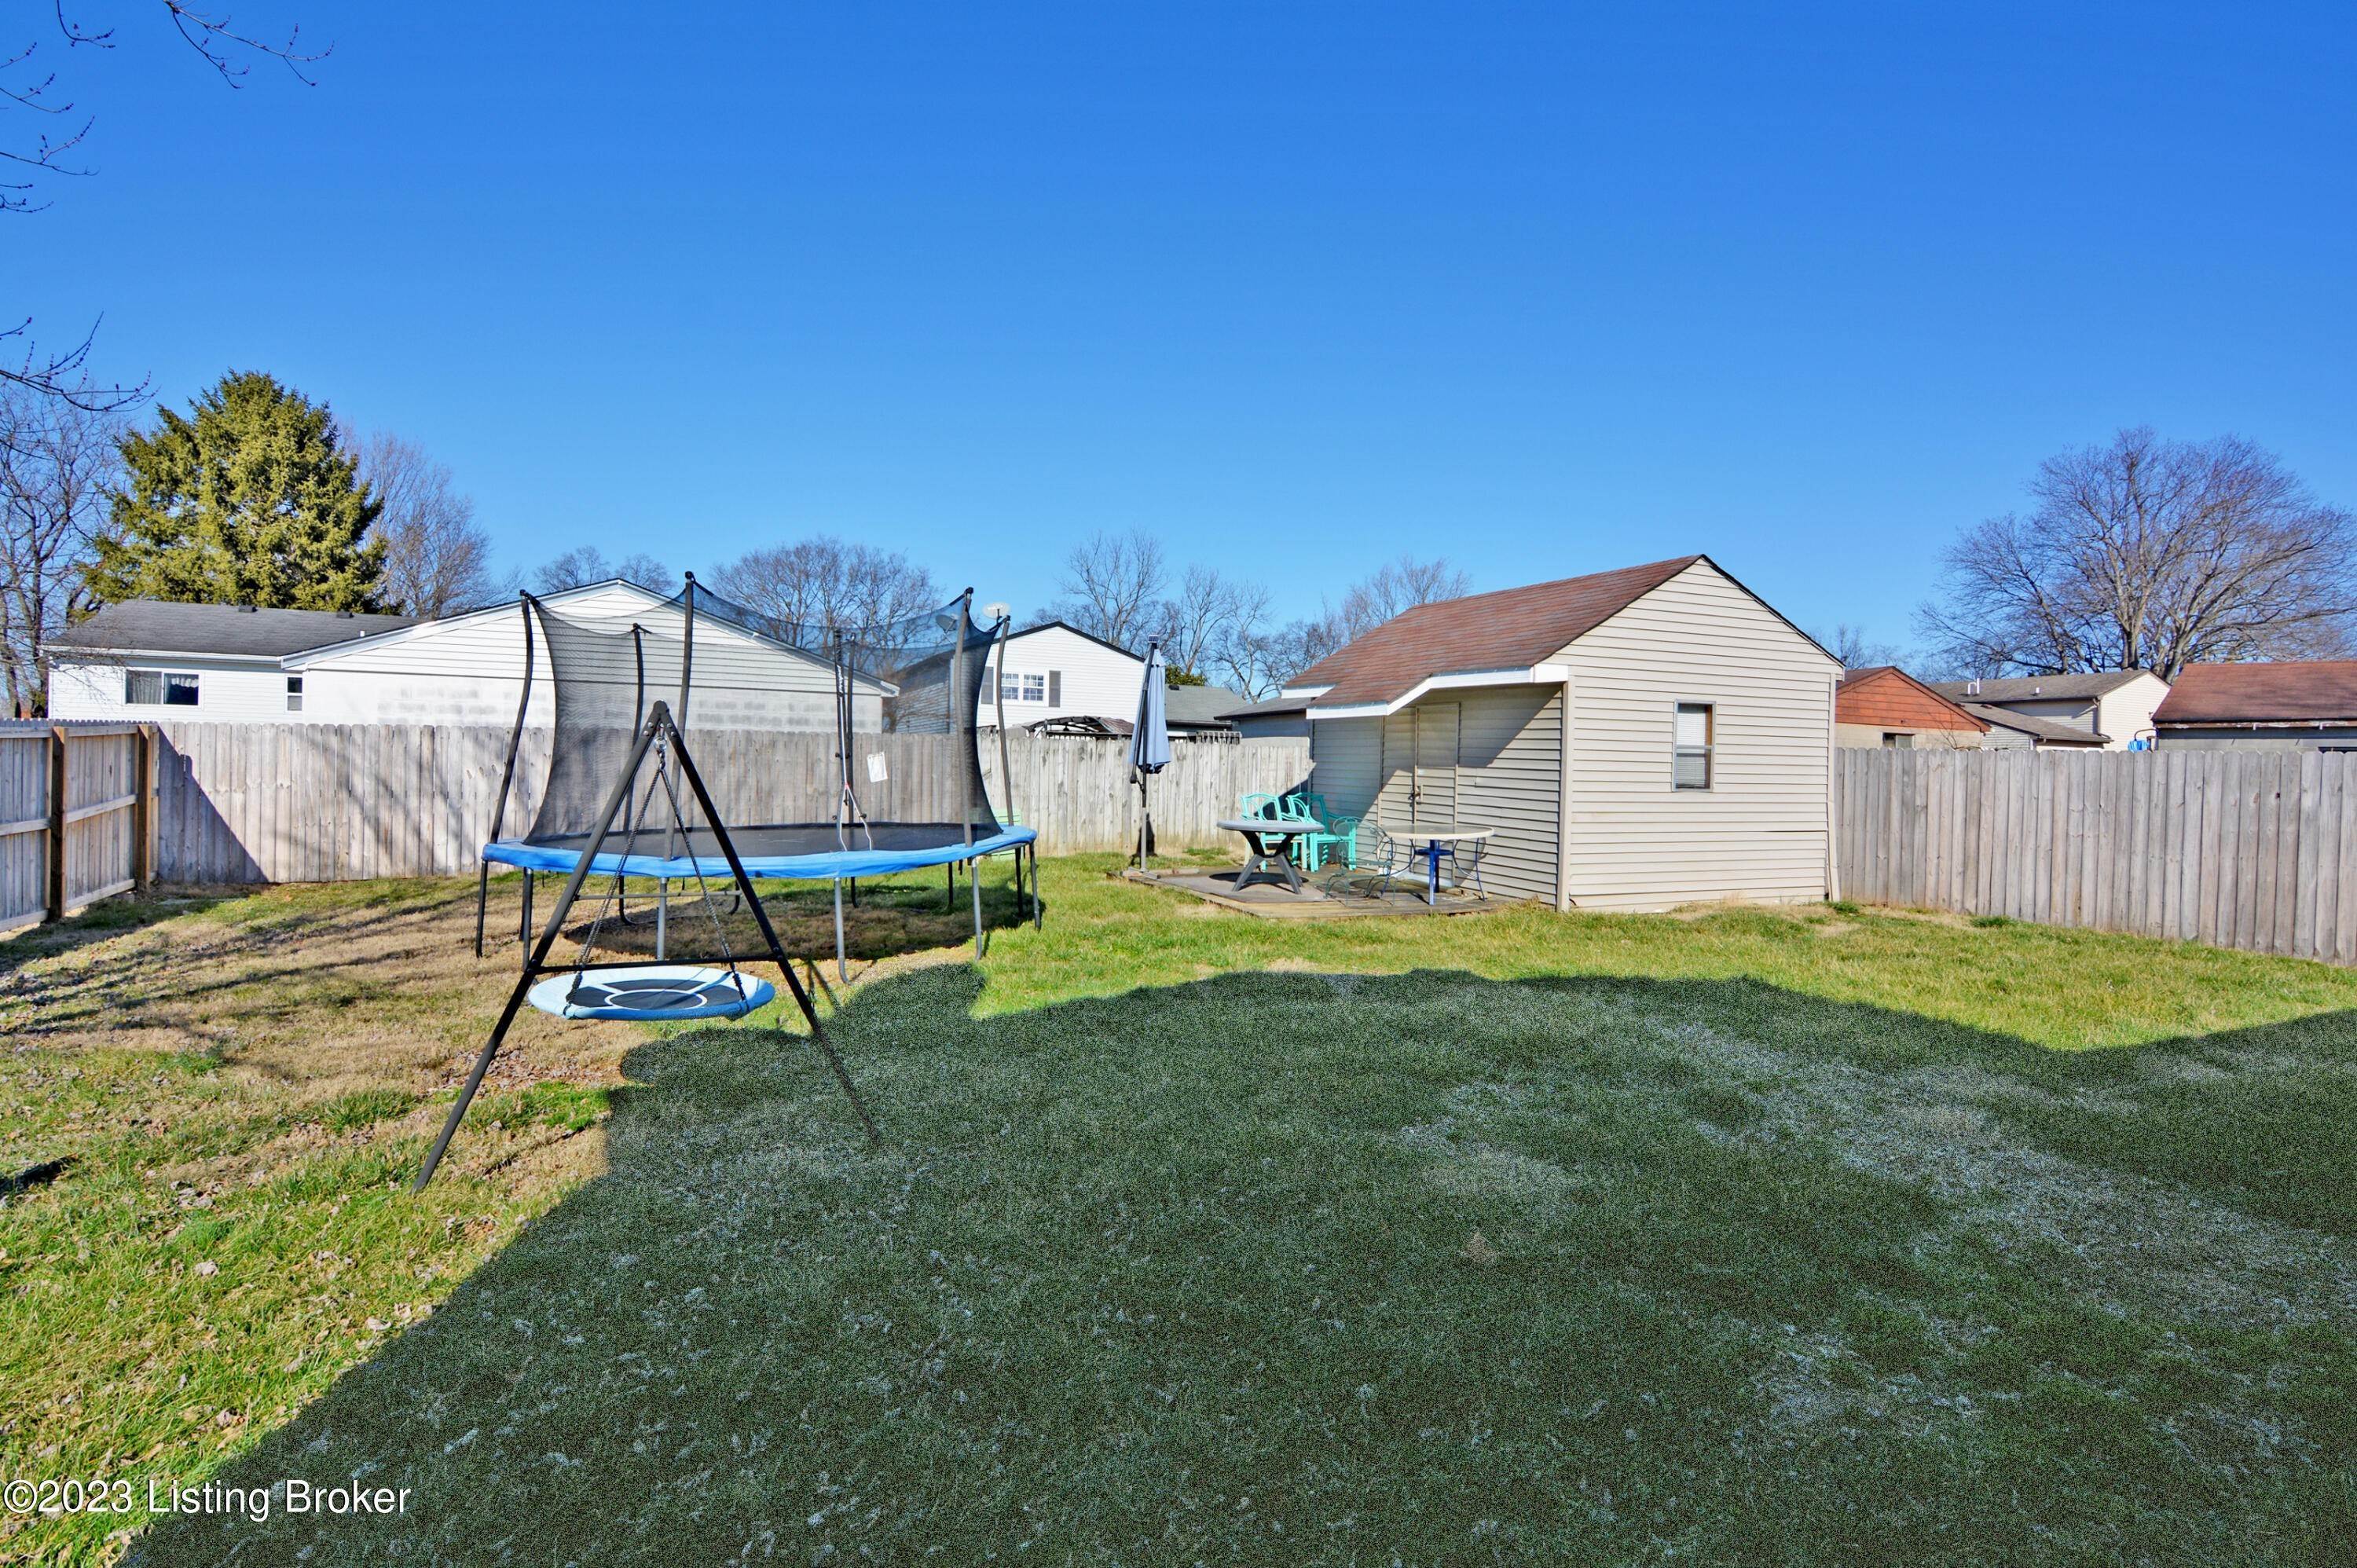 32. Single Family at Louisville, KY 40229